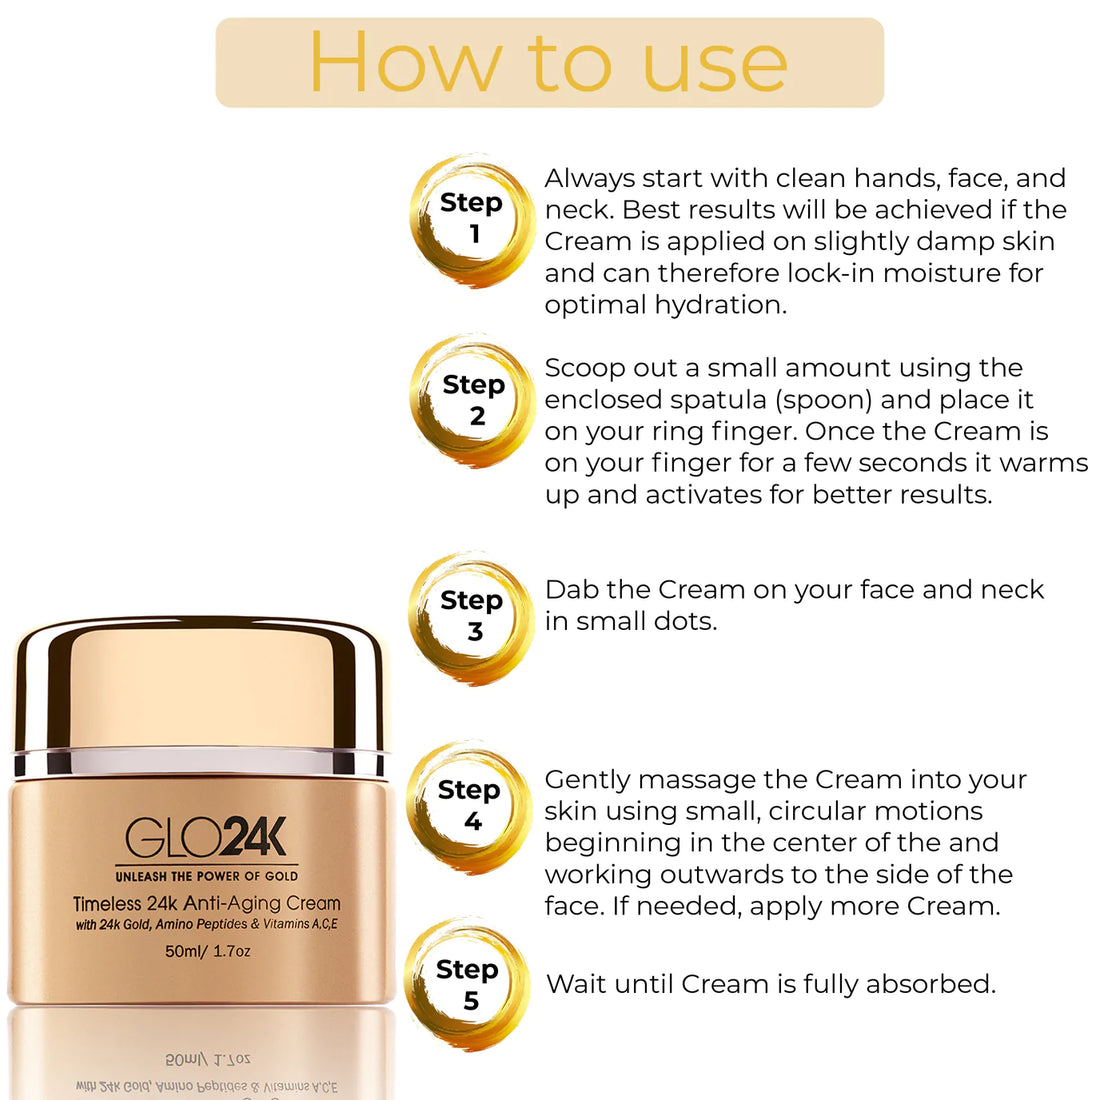 GLO24K Timeless 24k Anti-Ageing Cream, how to use